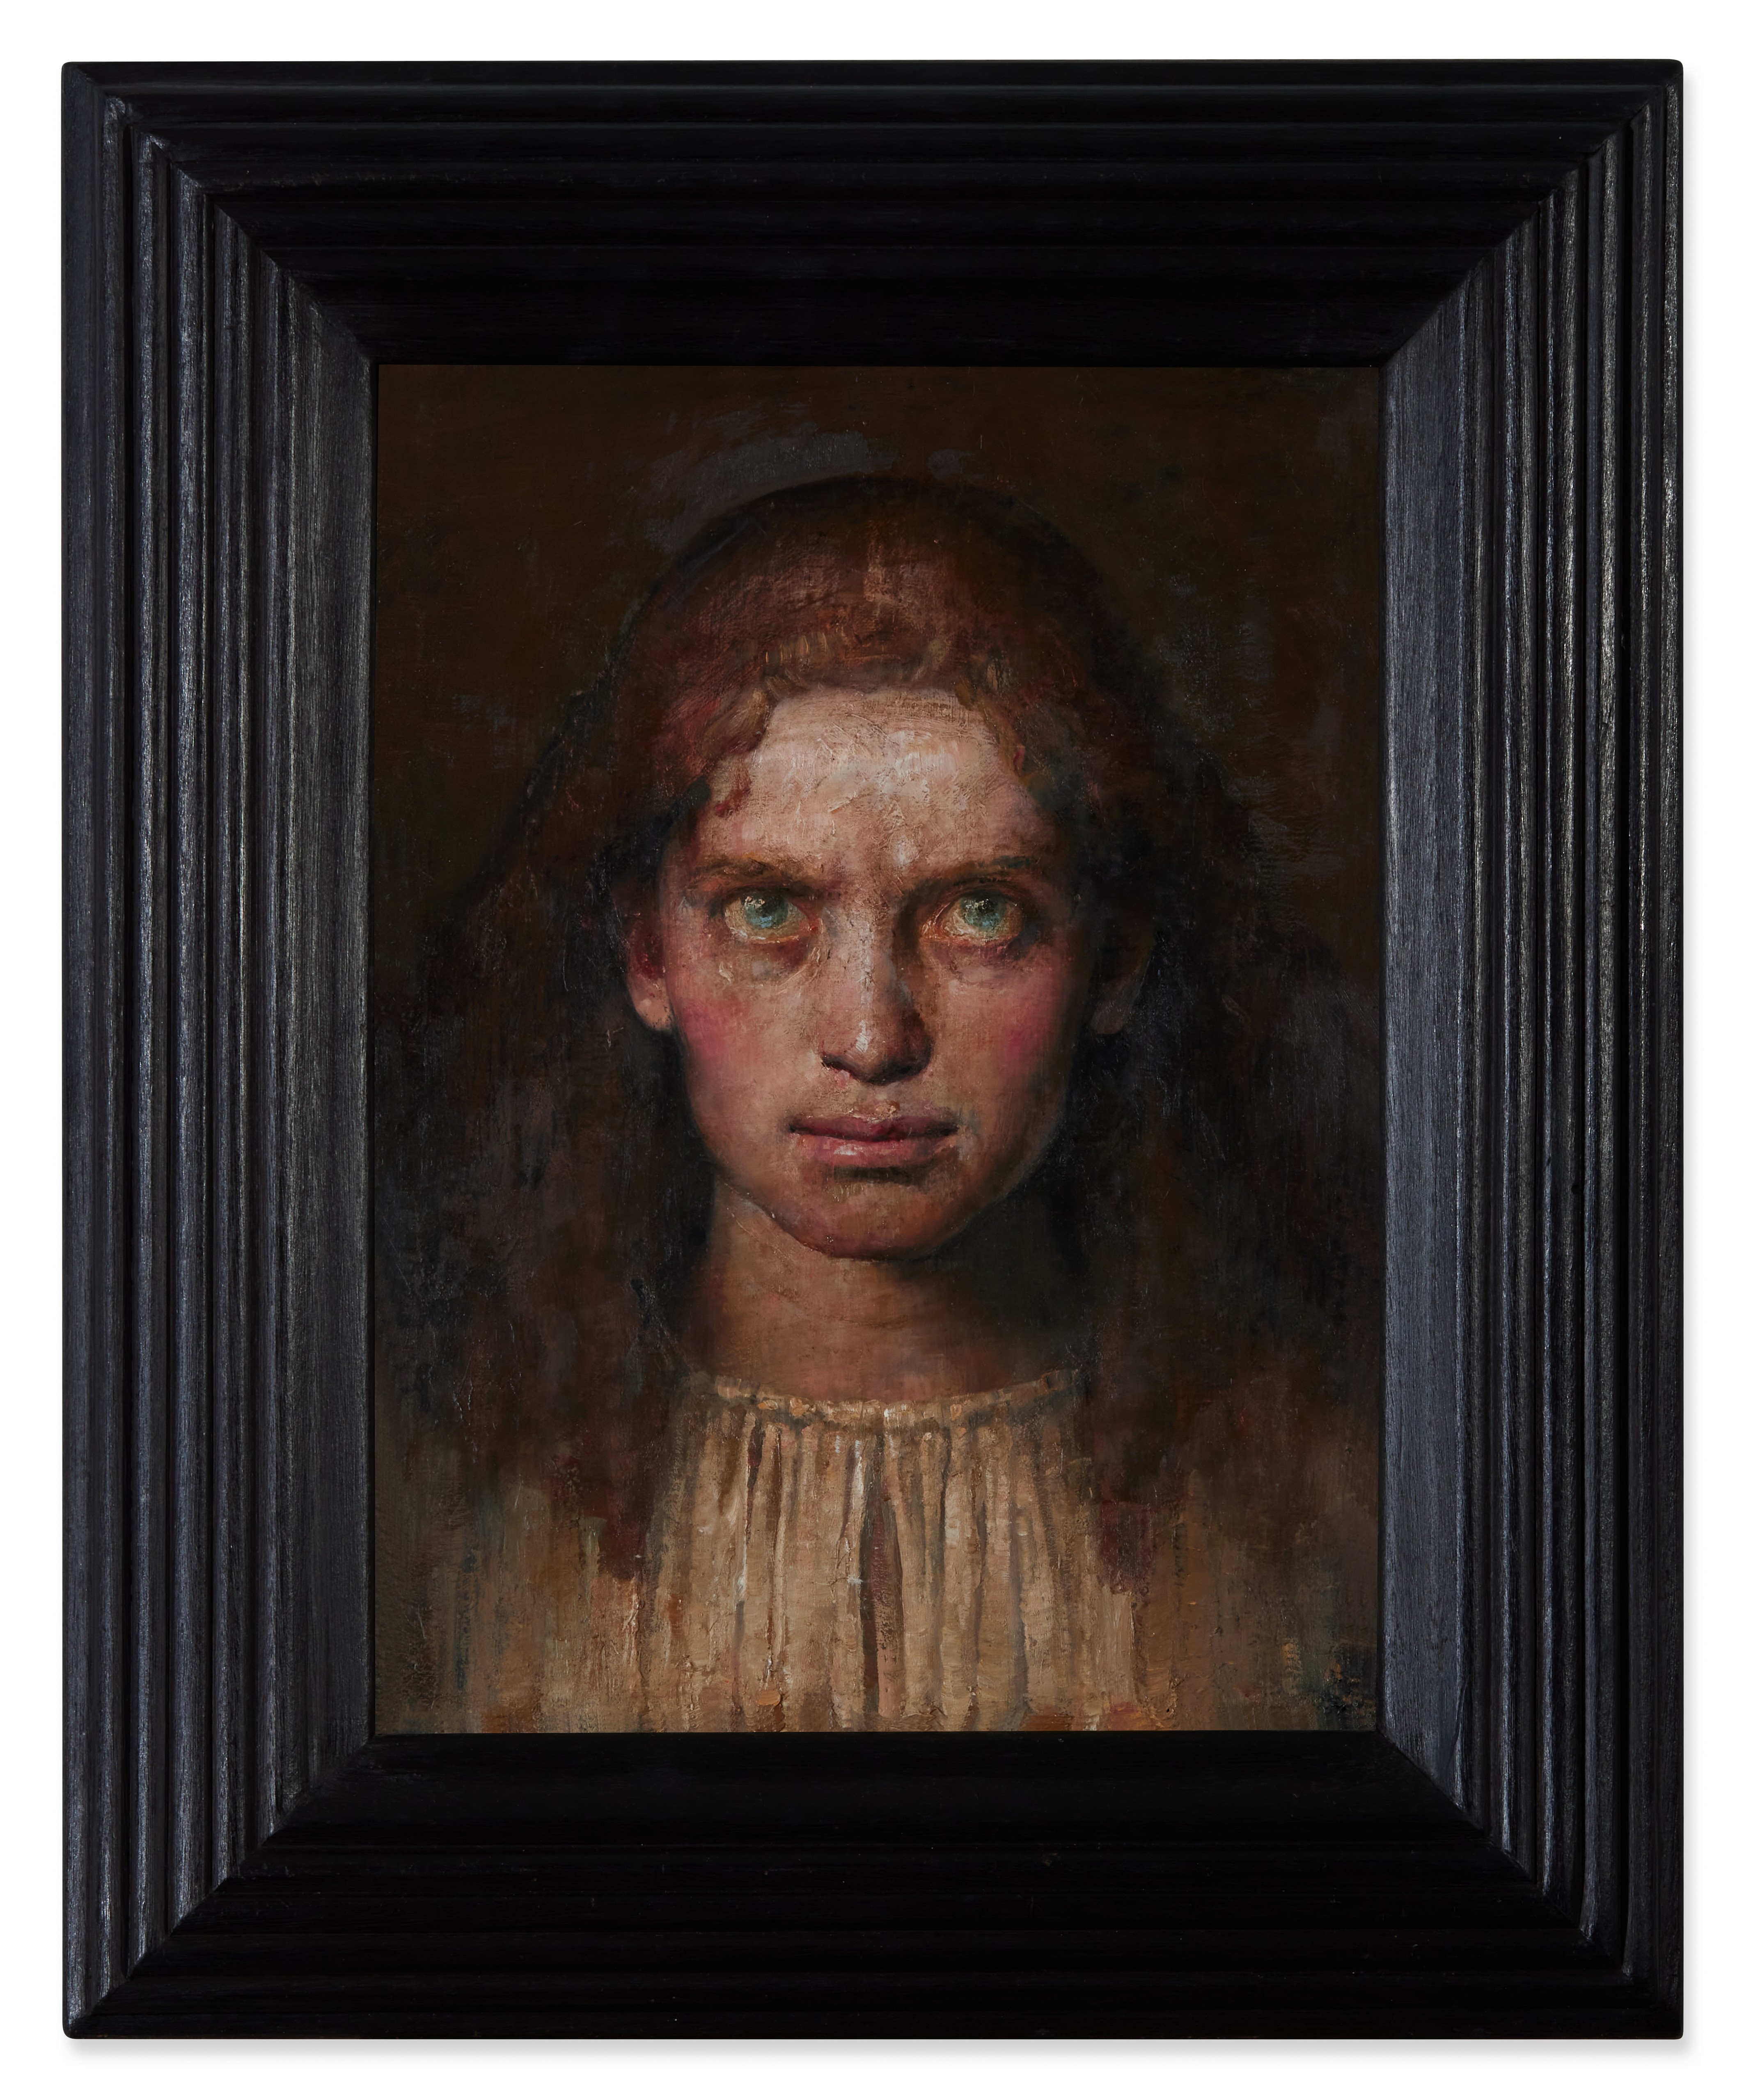 Artwork by Odd Nerdrum, Portrait of a Young Girl, Made of oil on linen